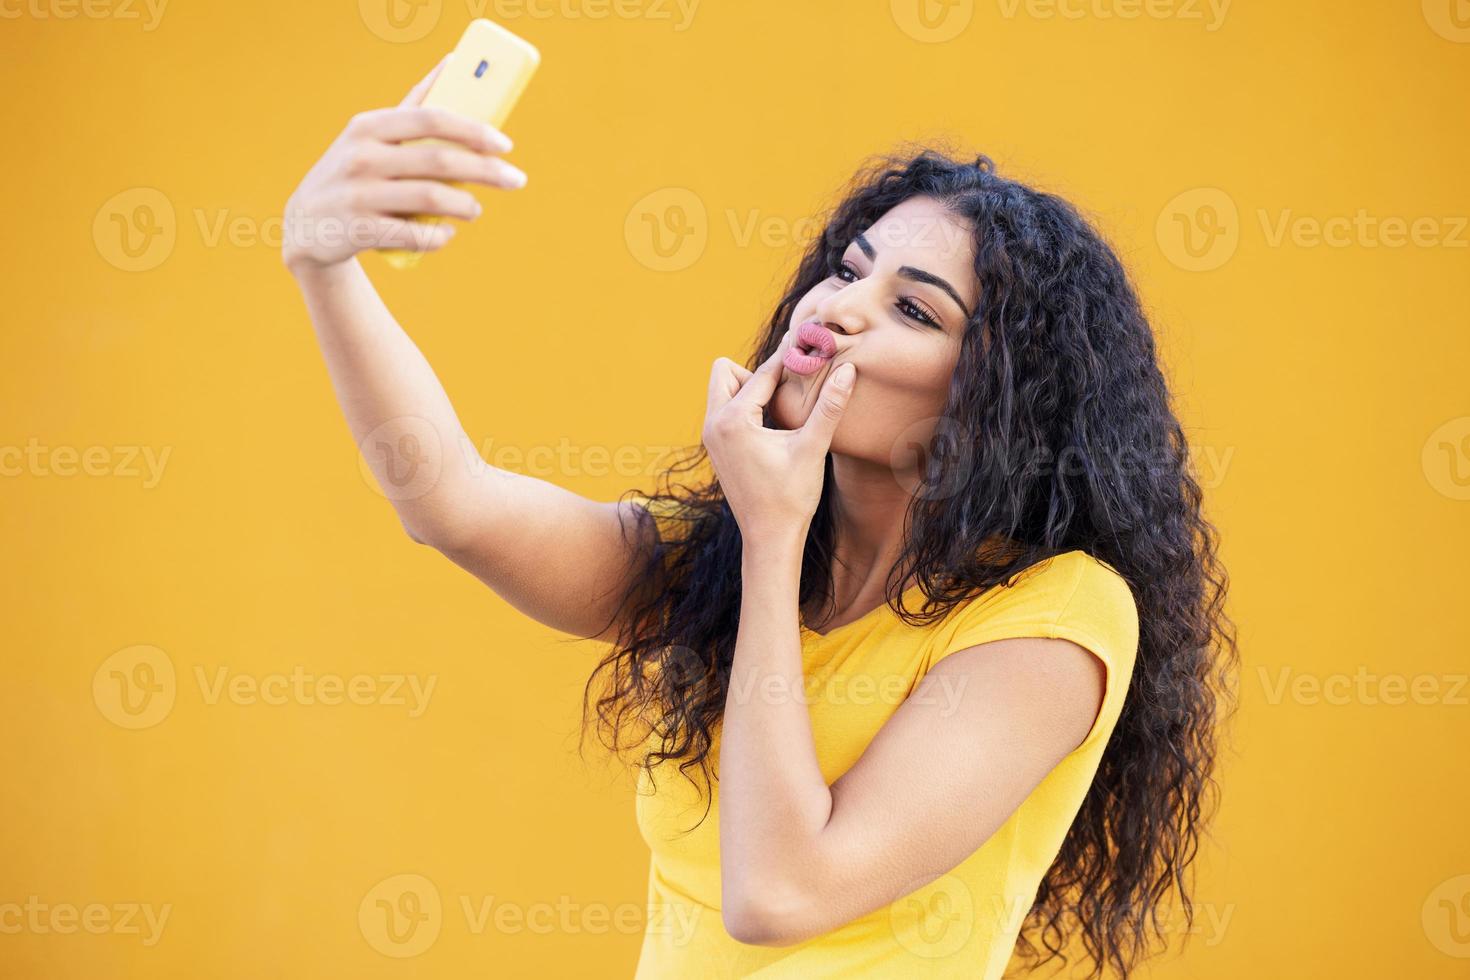 Young Arab woman taking selfie photograph with smartphone. photo